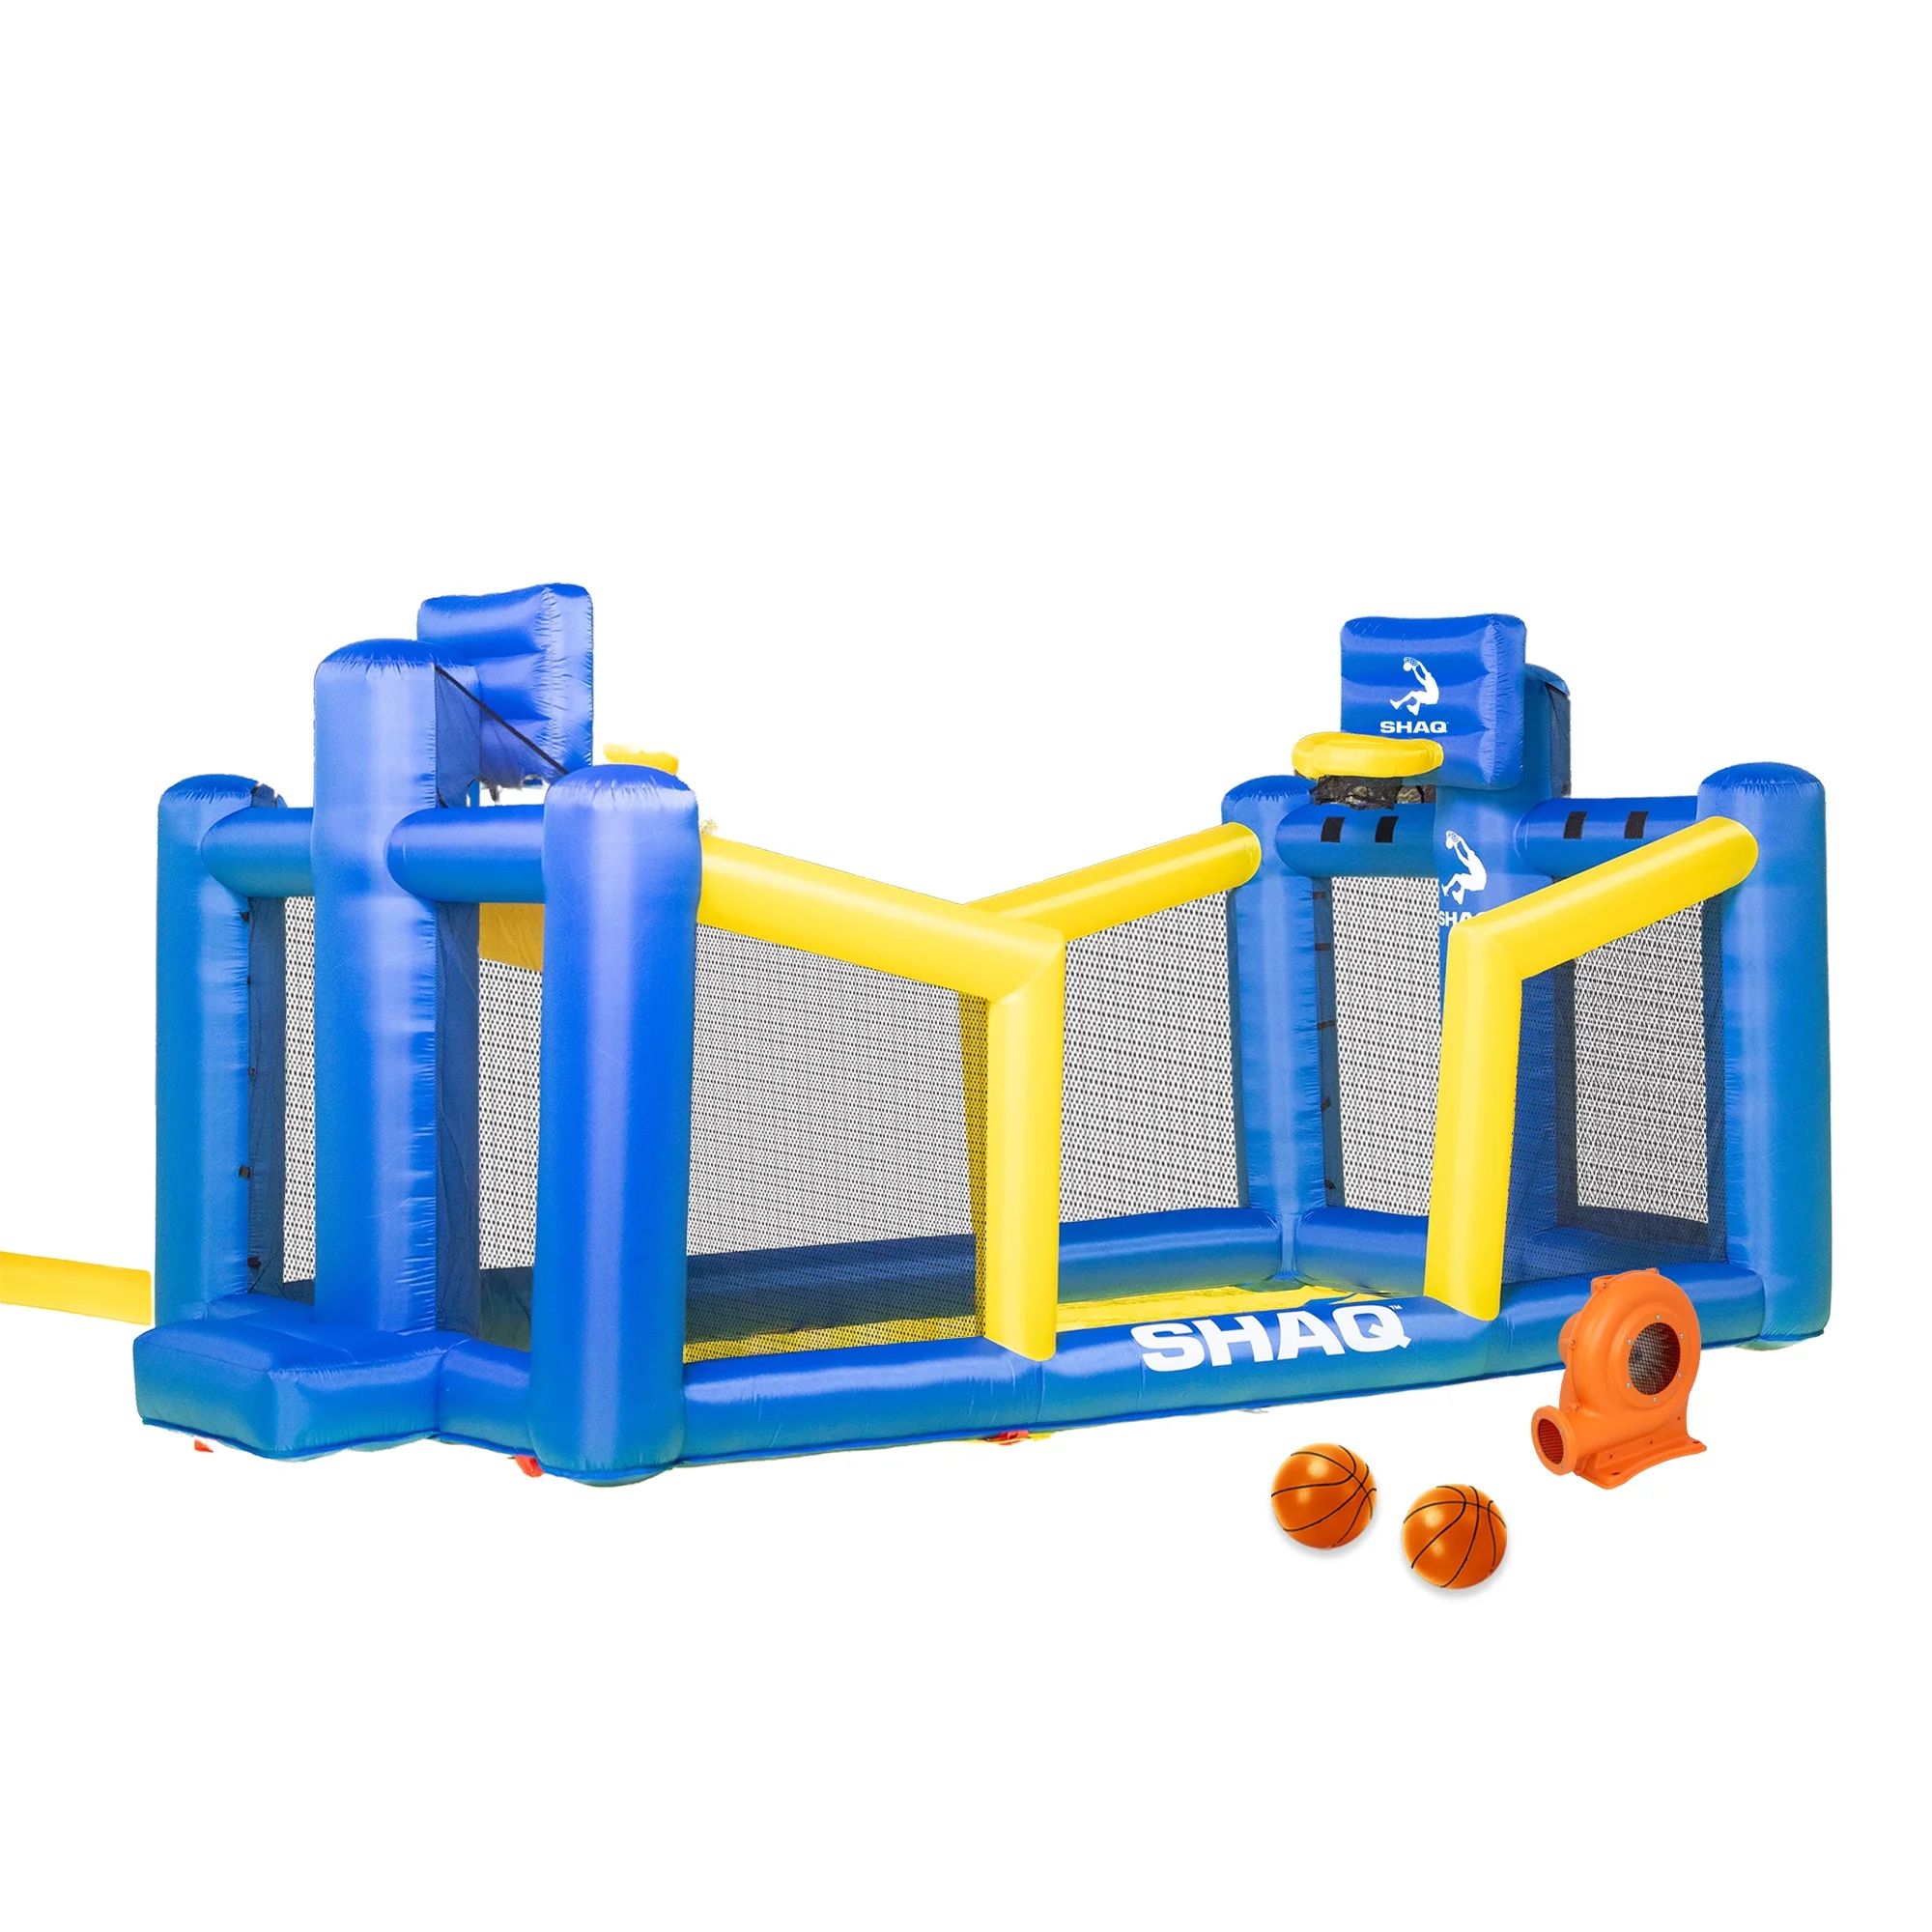 14' Shaq Constant Air Inflatable Basketball Court with Sprinkler and Pump for ages 3-8yrs | Walmart (US)